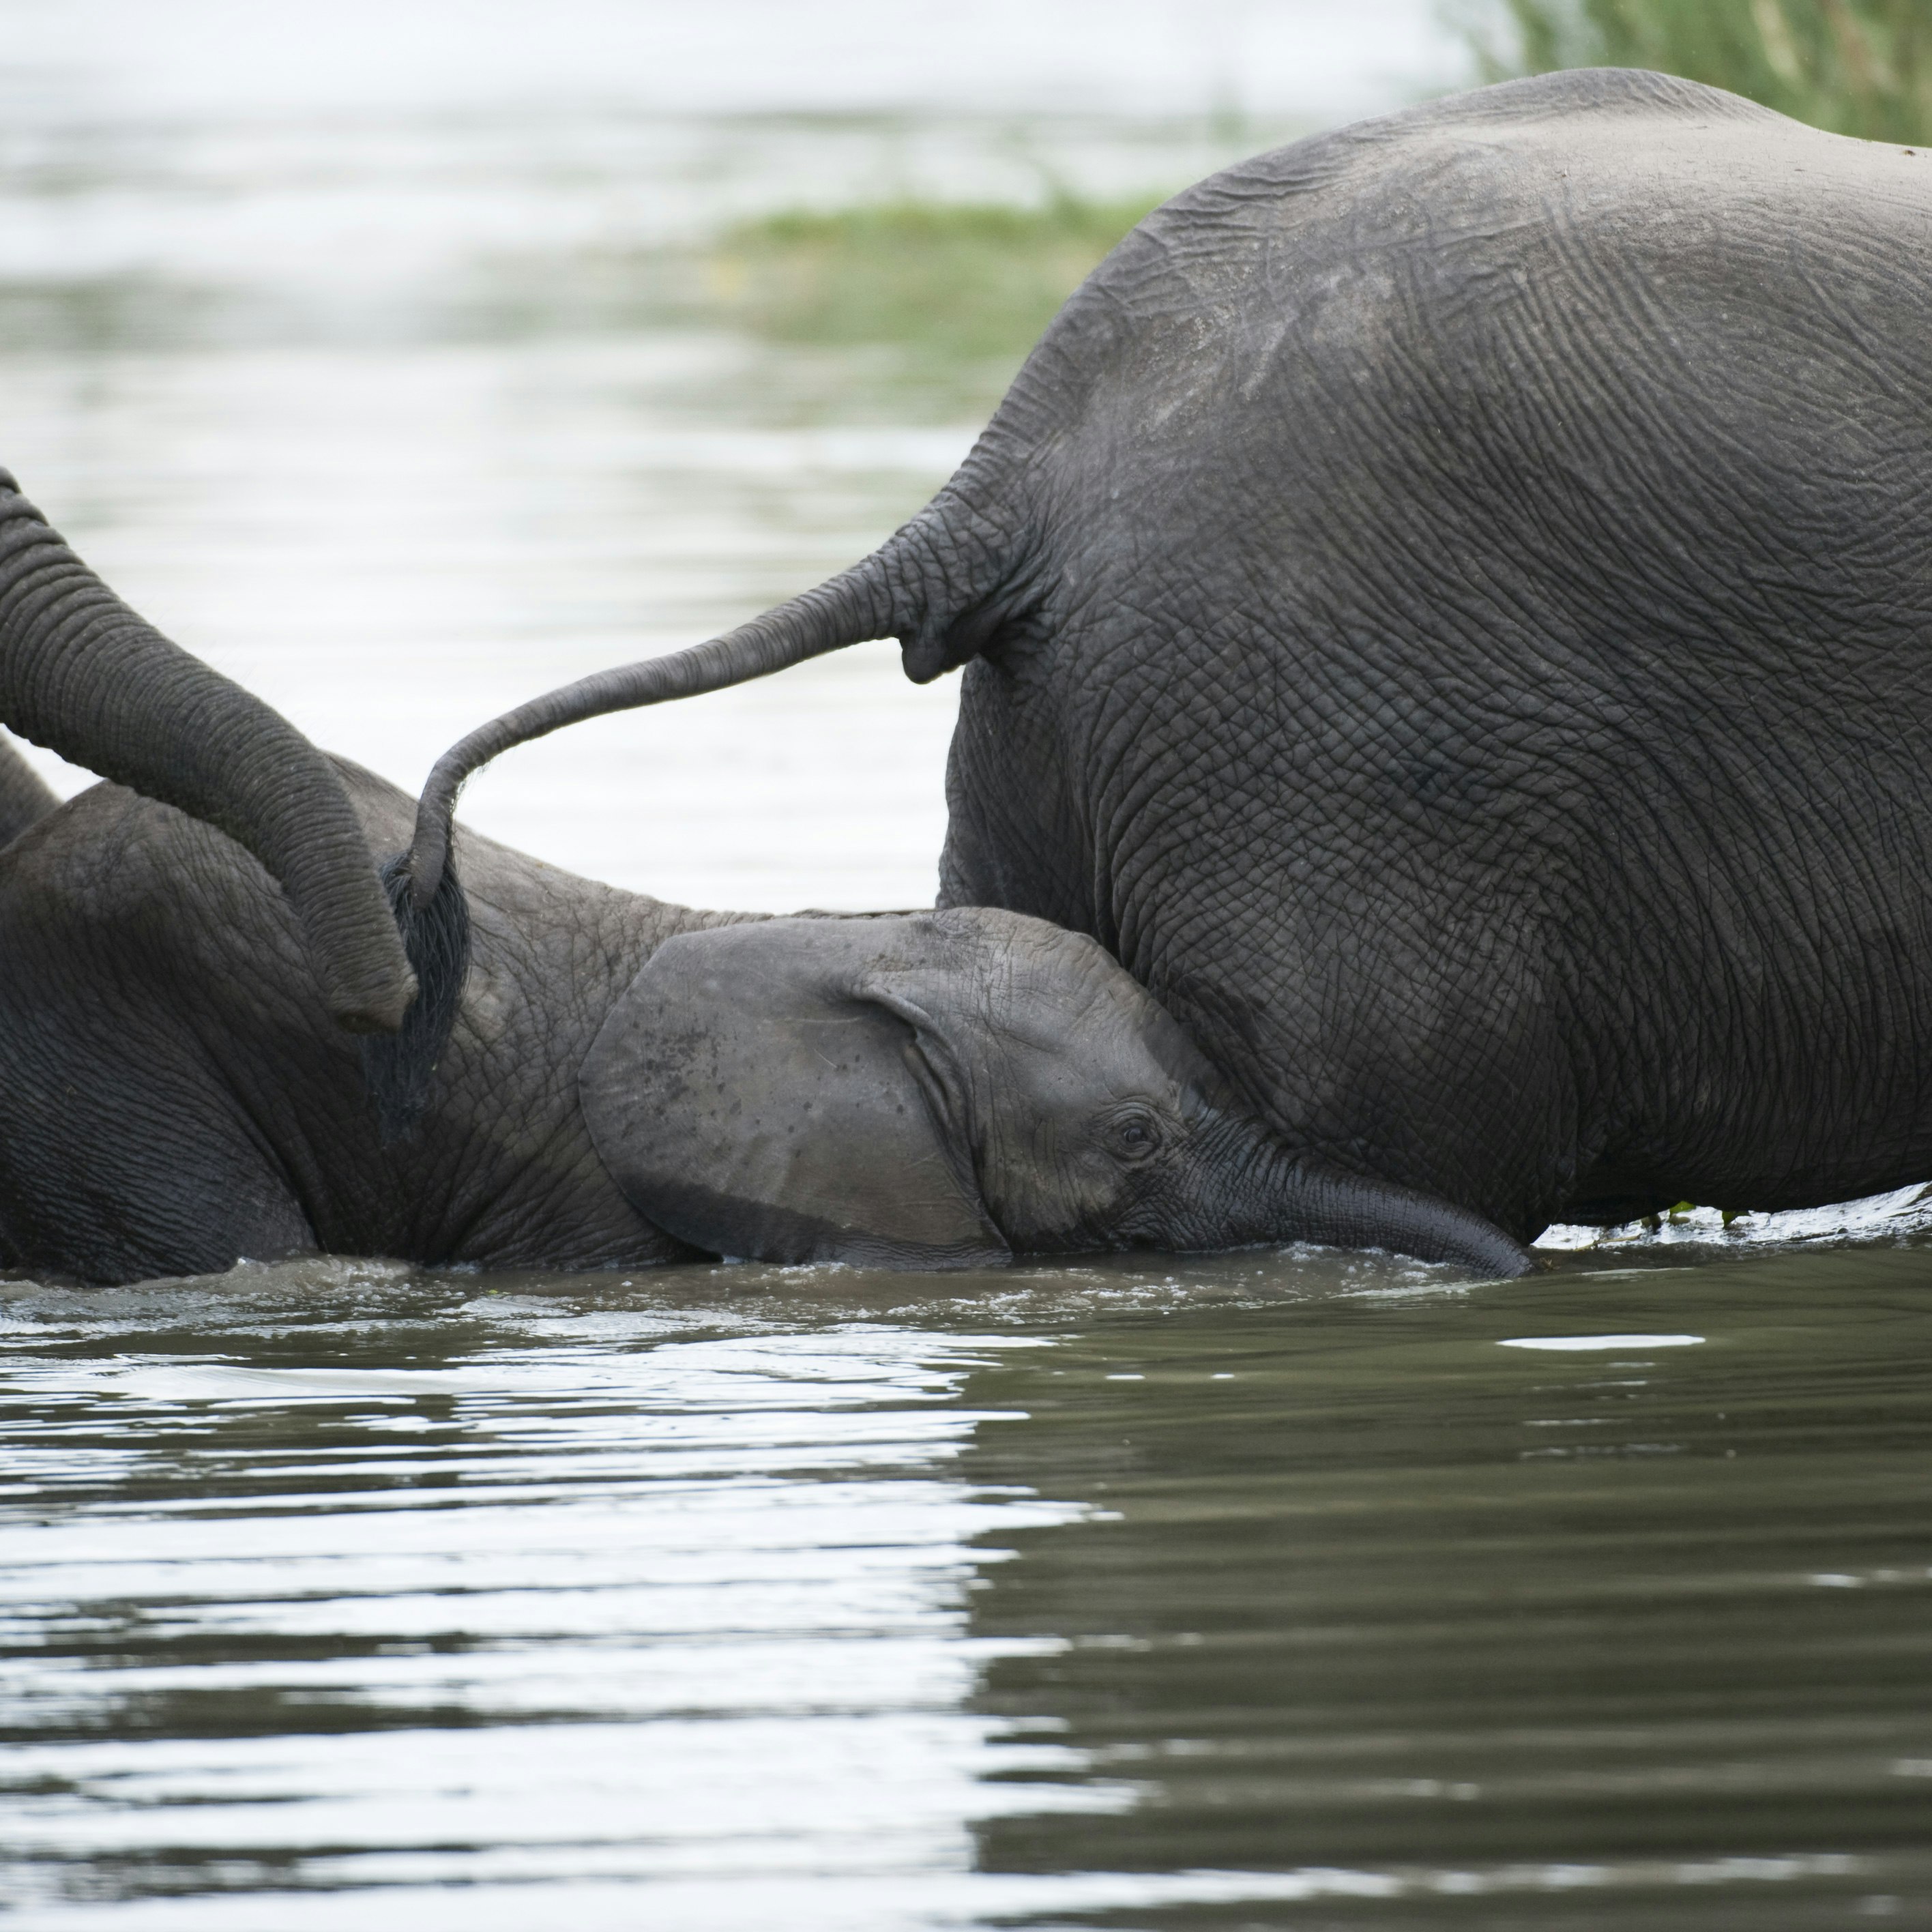 African elephants with young ( Loxodonta africana africana) in the Shire river, Liwonde National Park.